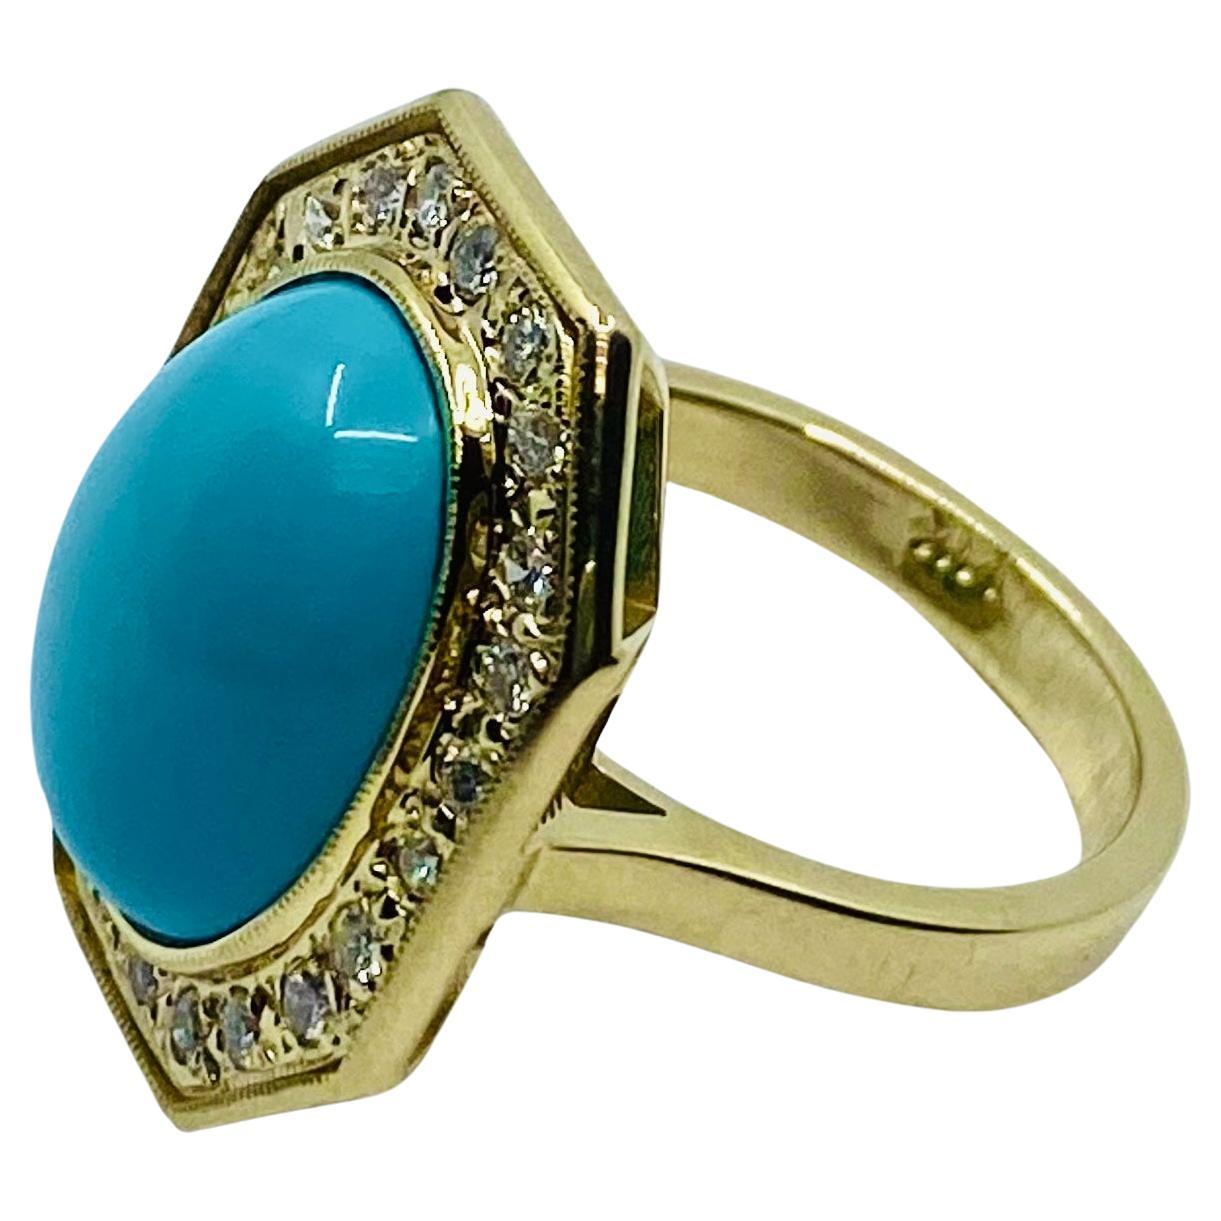 Vintage Turquoise Ring 14k Gold Octagon Shape In Good Condition For Sale In Beverly Hills, CA